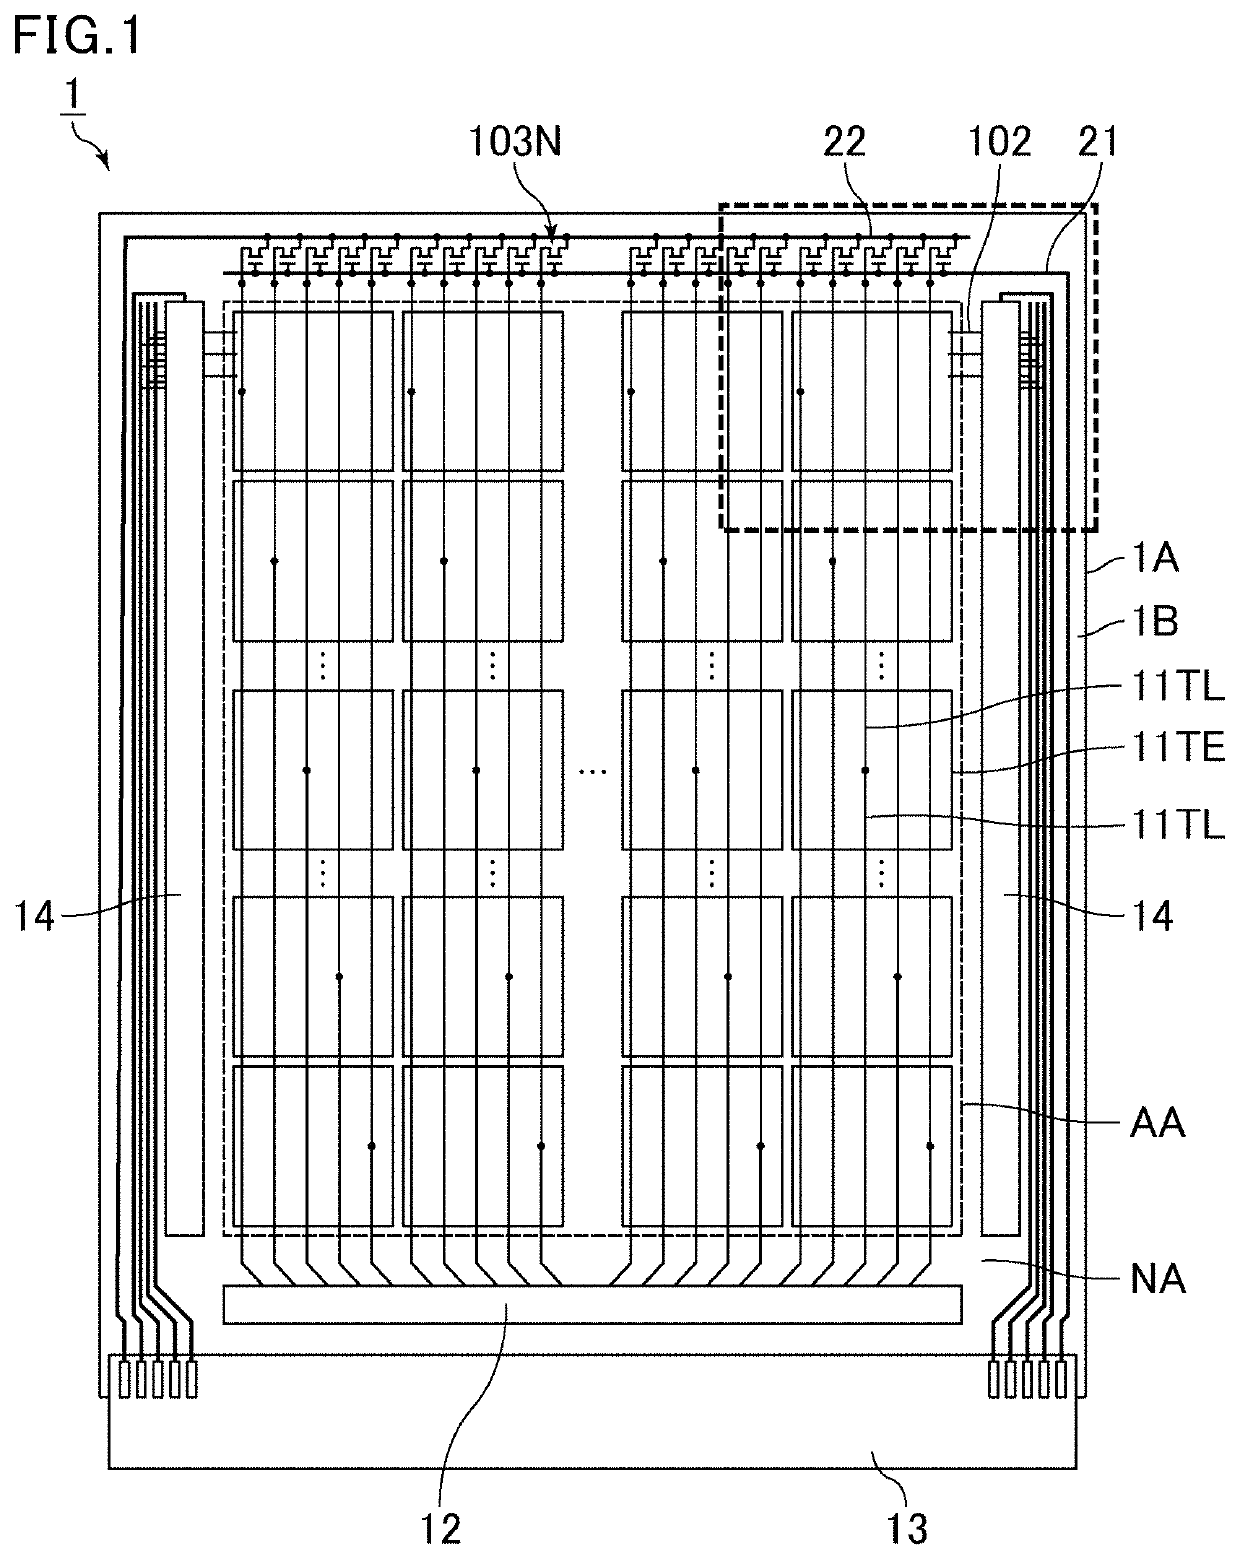 Image display device with frame region transistor control line including stacked line layers